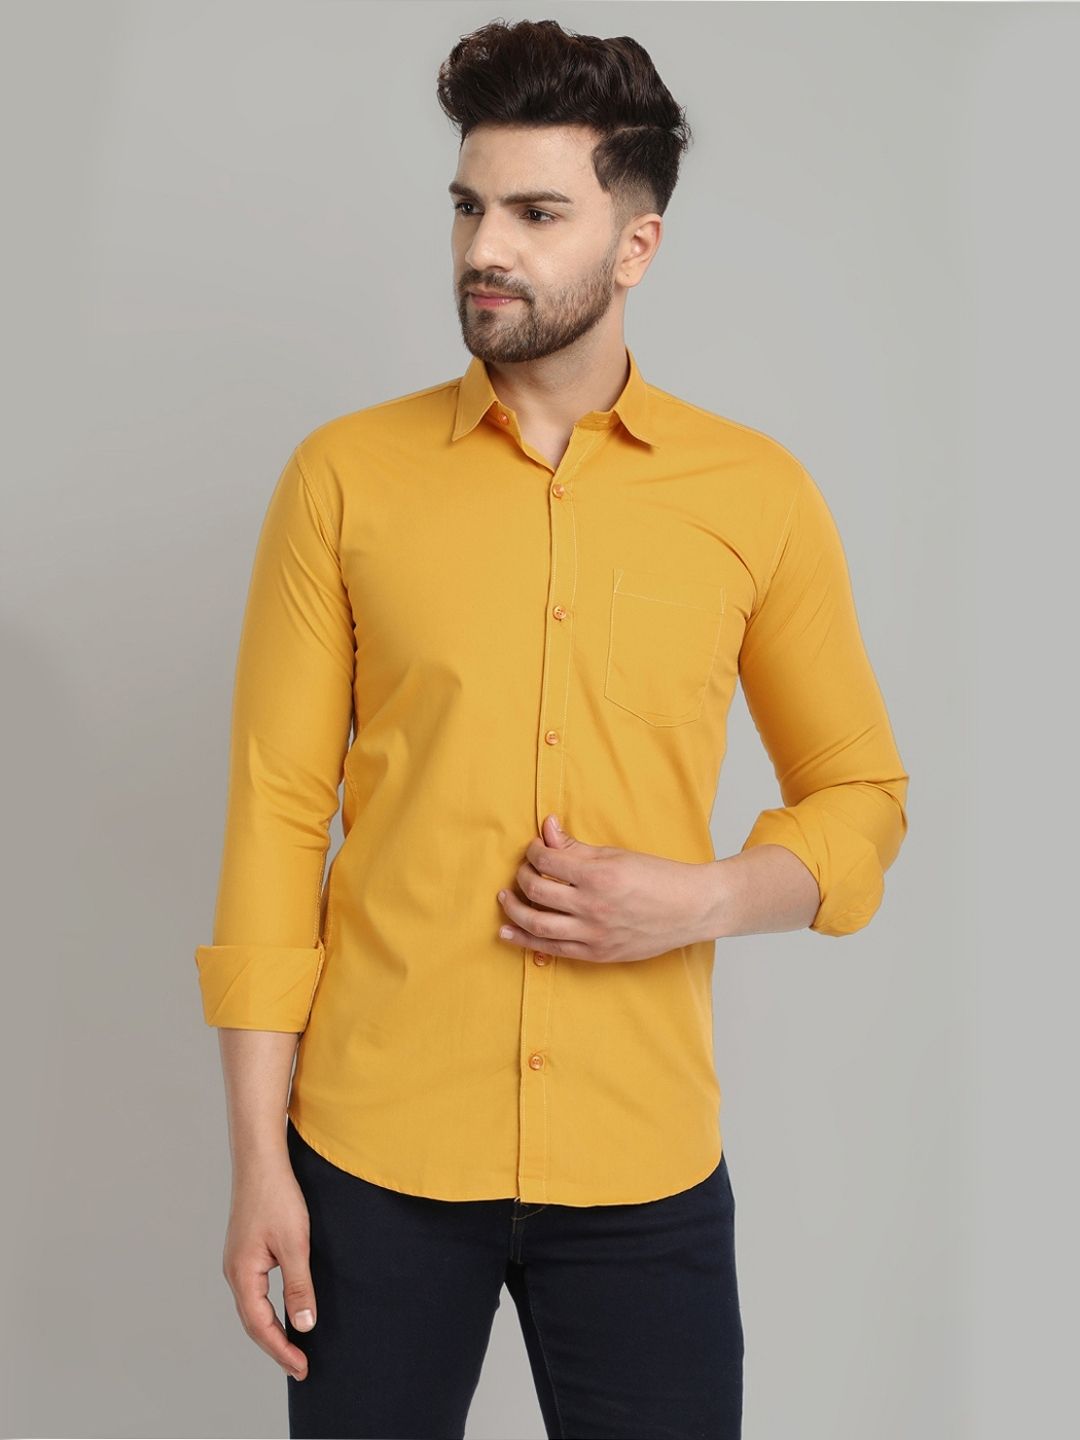 Groovy Pure Cotton Solid shirt - Mustard